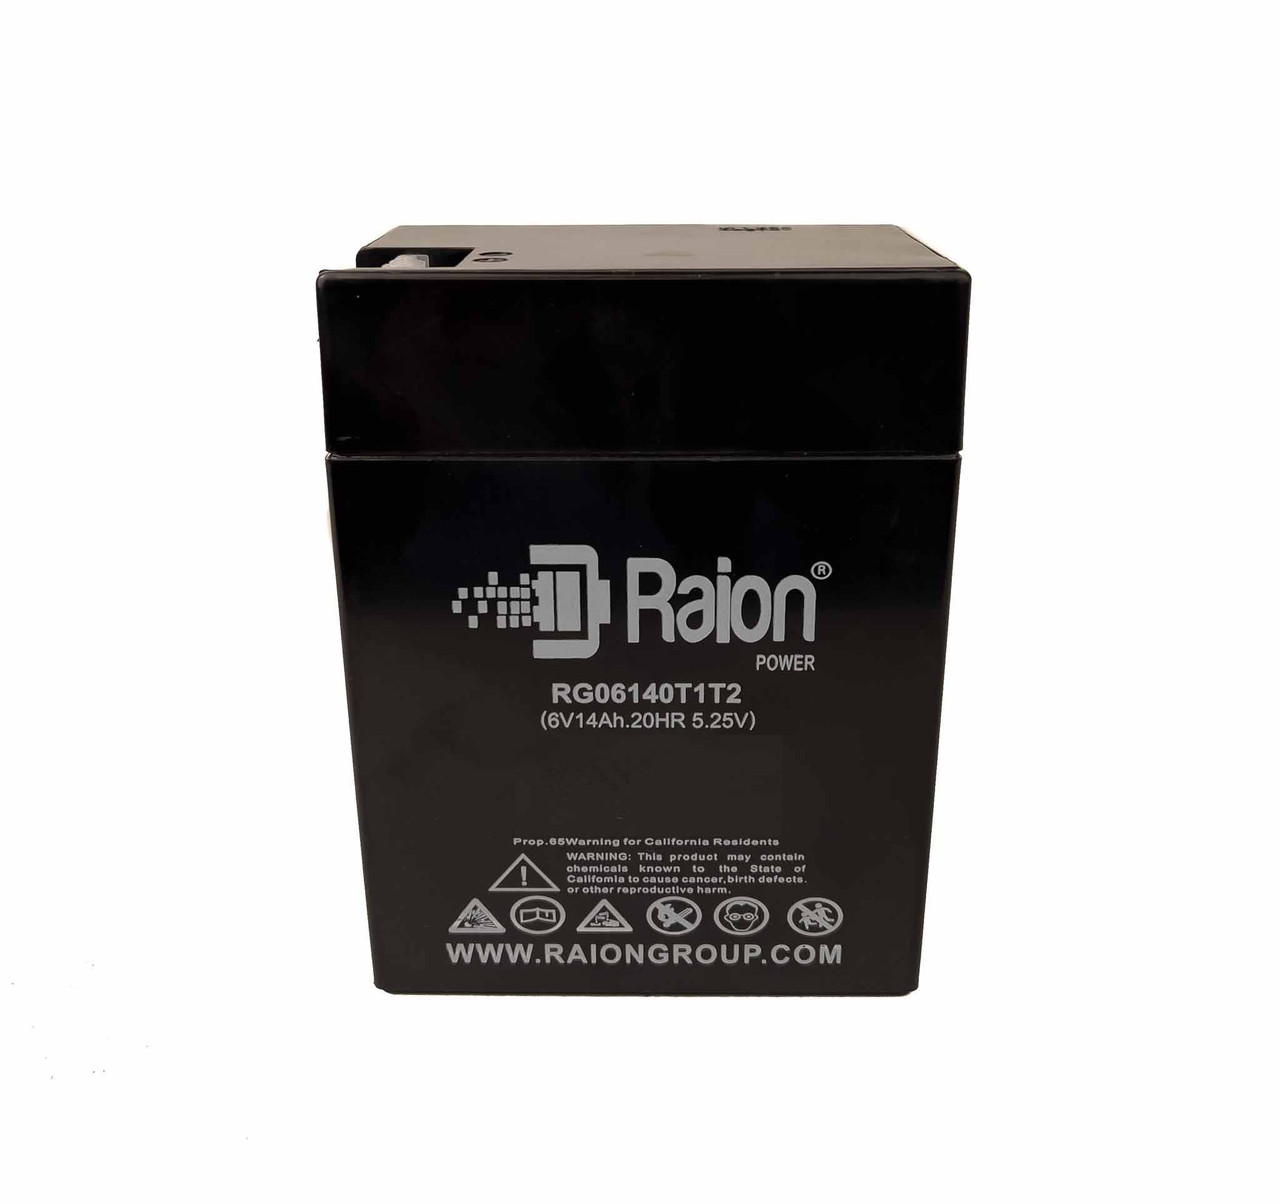 Raion Power RG06140T1T2 6V 14Ah Replacement T1T2 Battery Terminals for Ballet Barbie 76104-9993